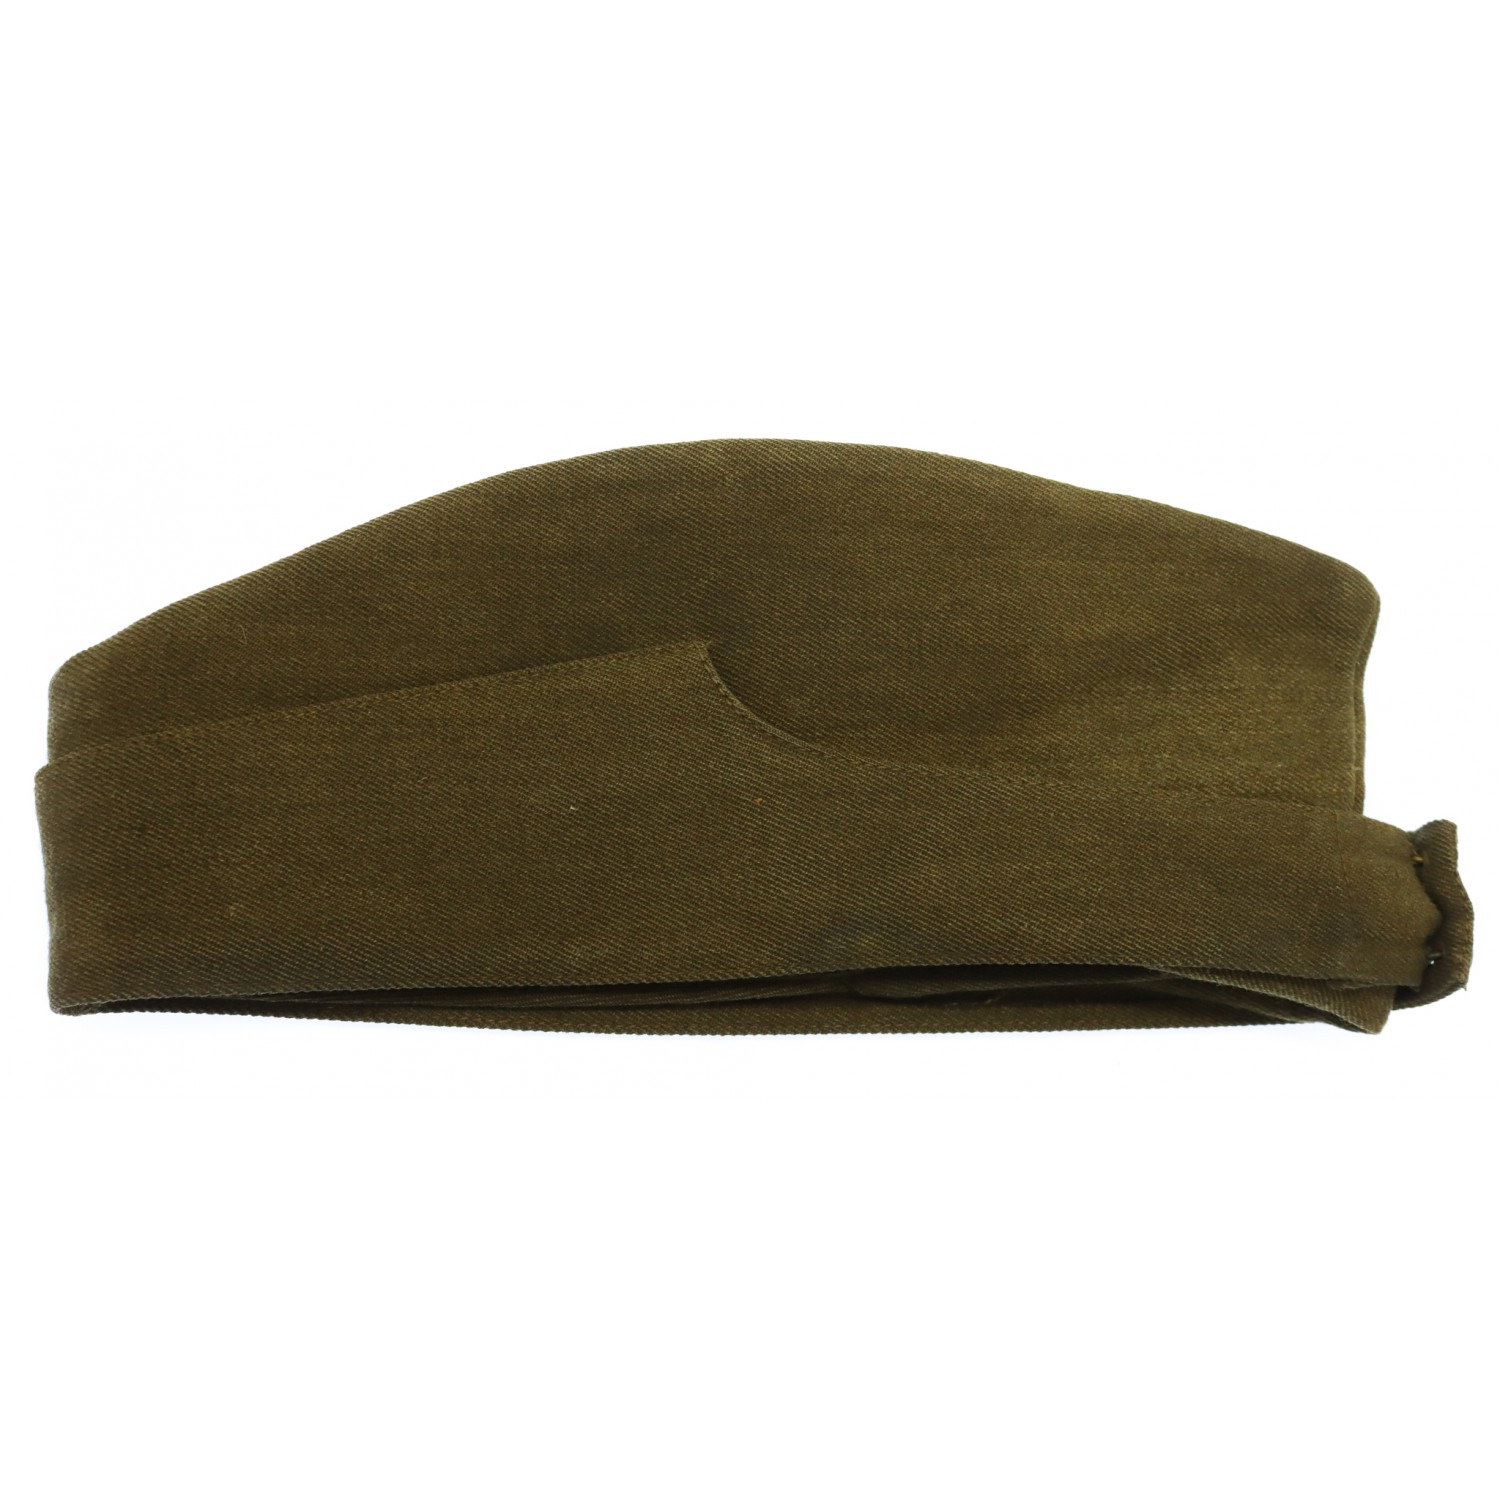 WW2 King's Own Yorkshire Light Infantry (K.O.Y.L.I.) 1940 Dated Side Cap